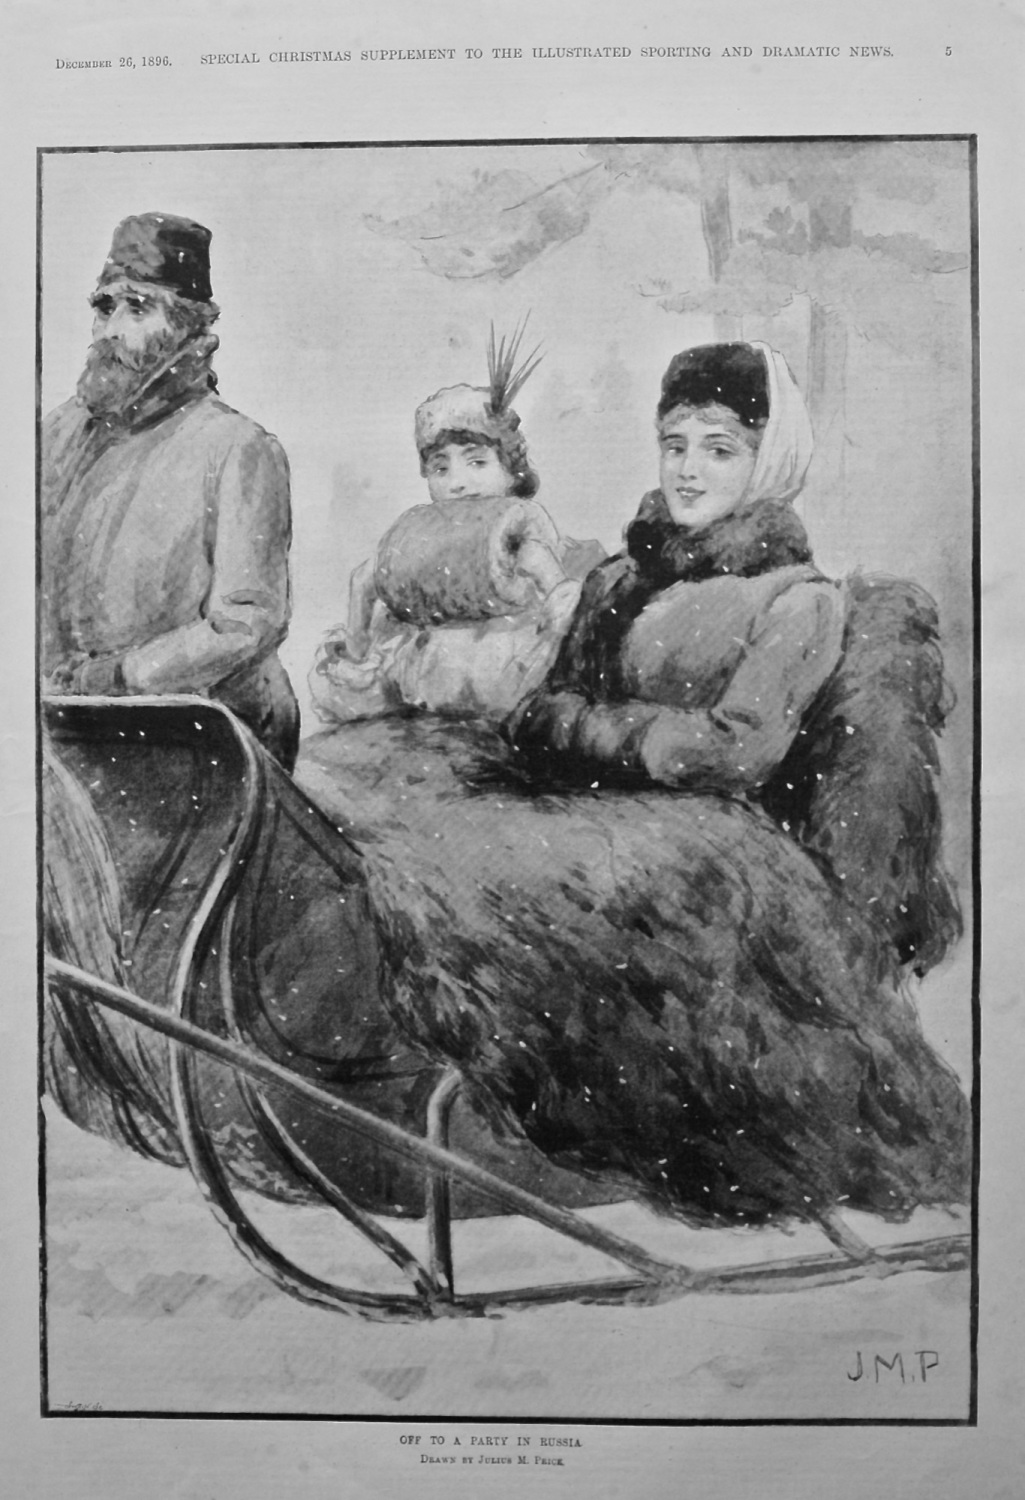 Off to a Party in Russia.  1896.